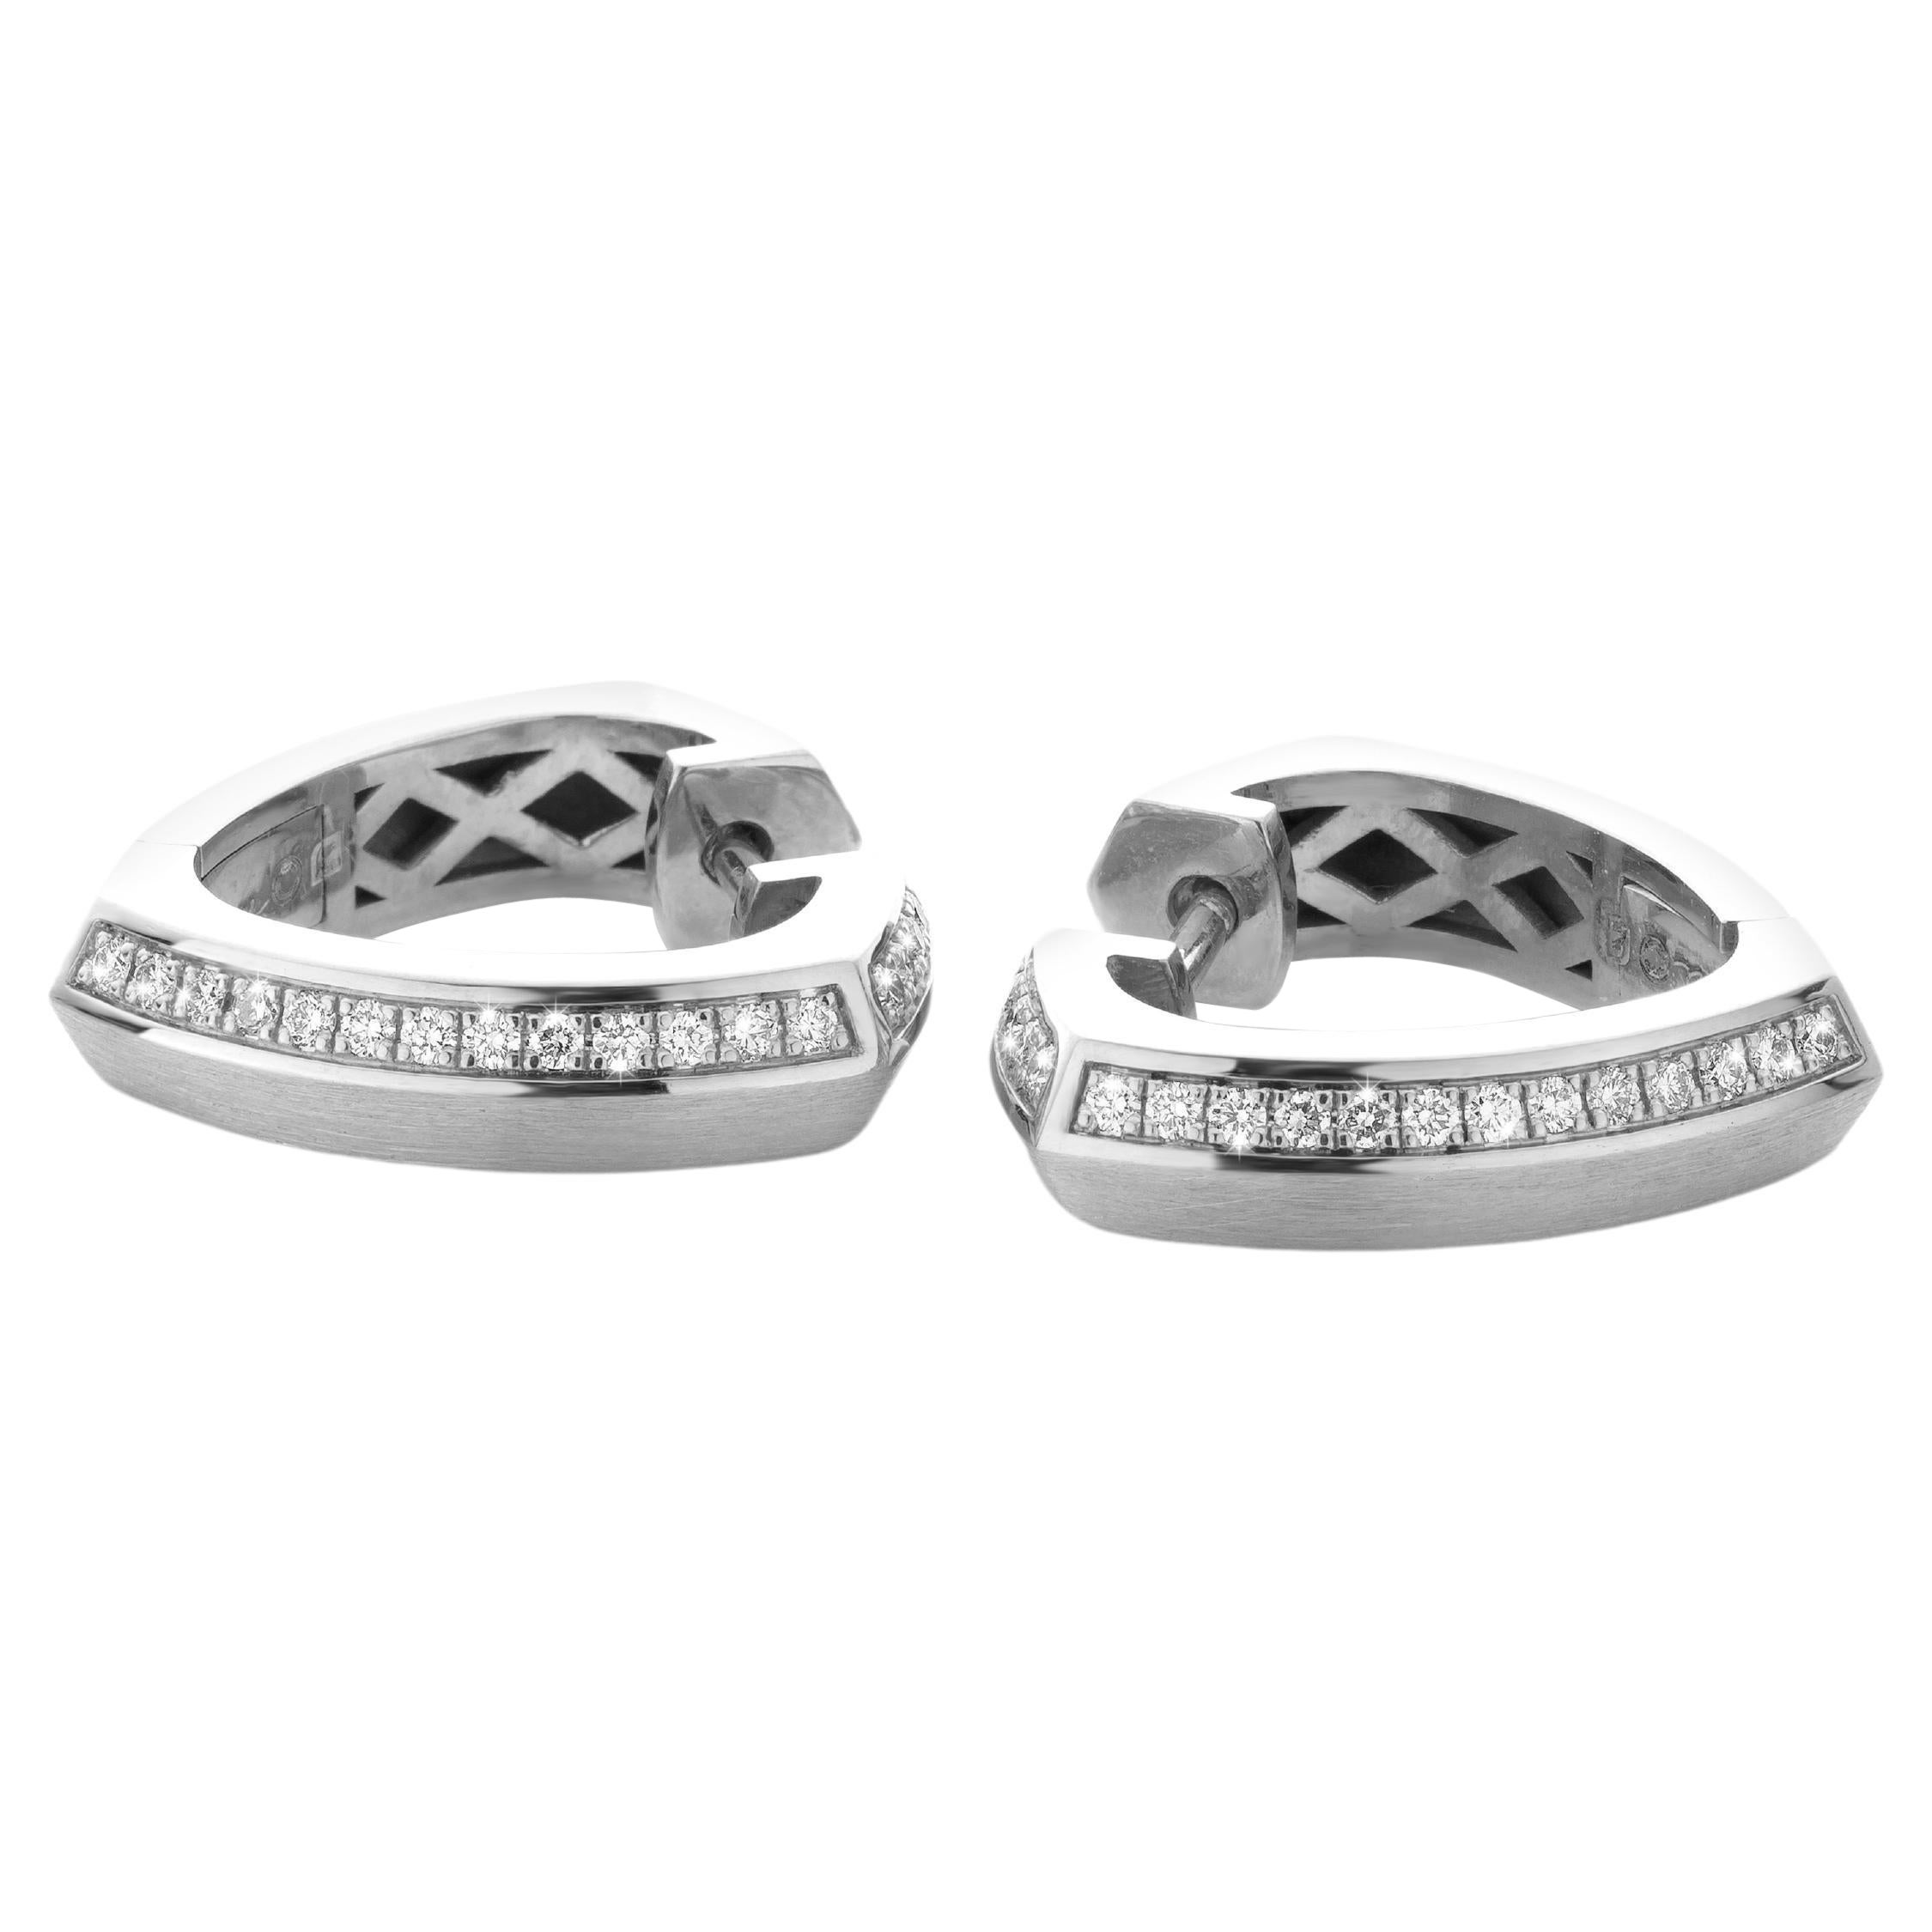 Cober with 42 Brilliant-cut Diamonds 0.294 Ct total weight White Gold Earrings